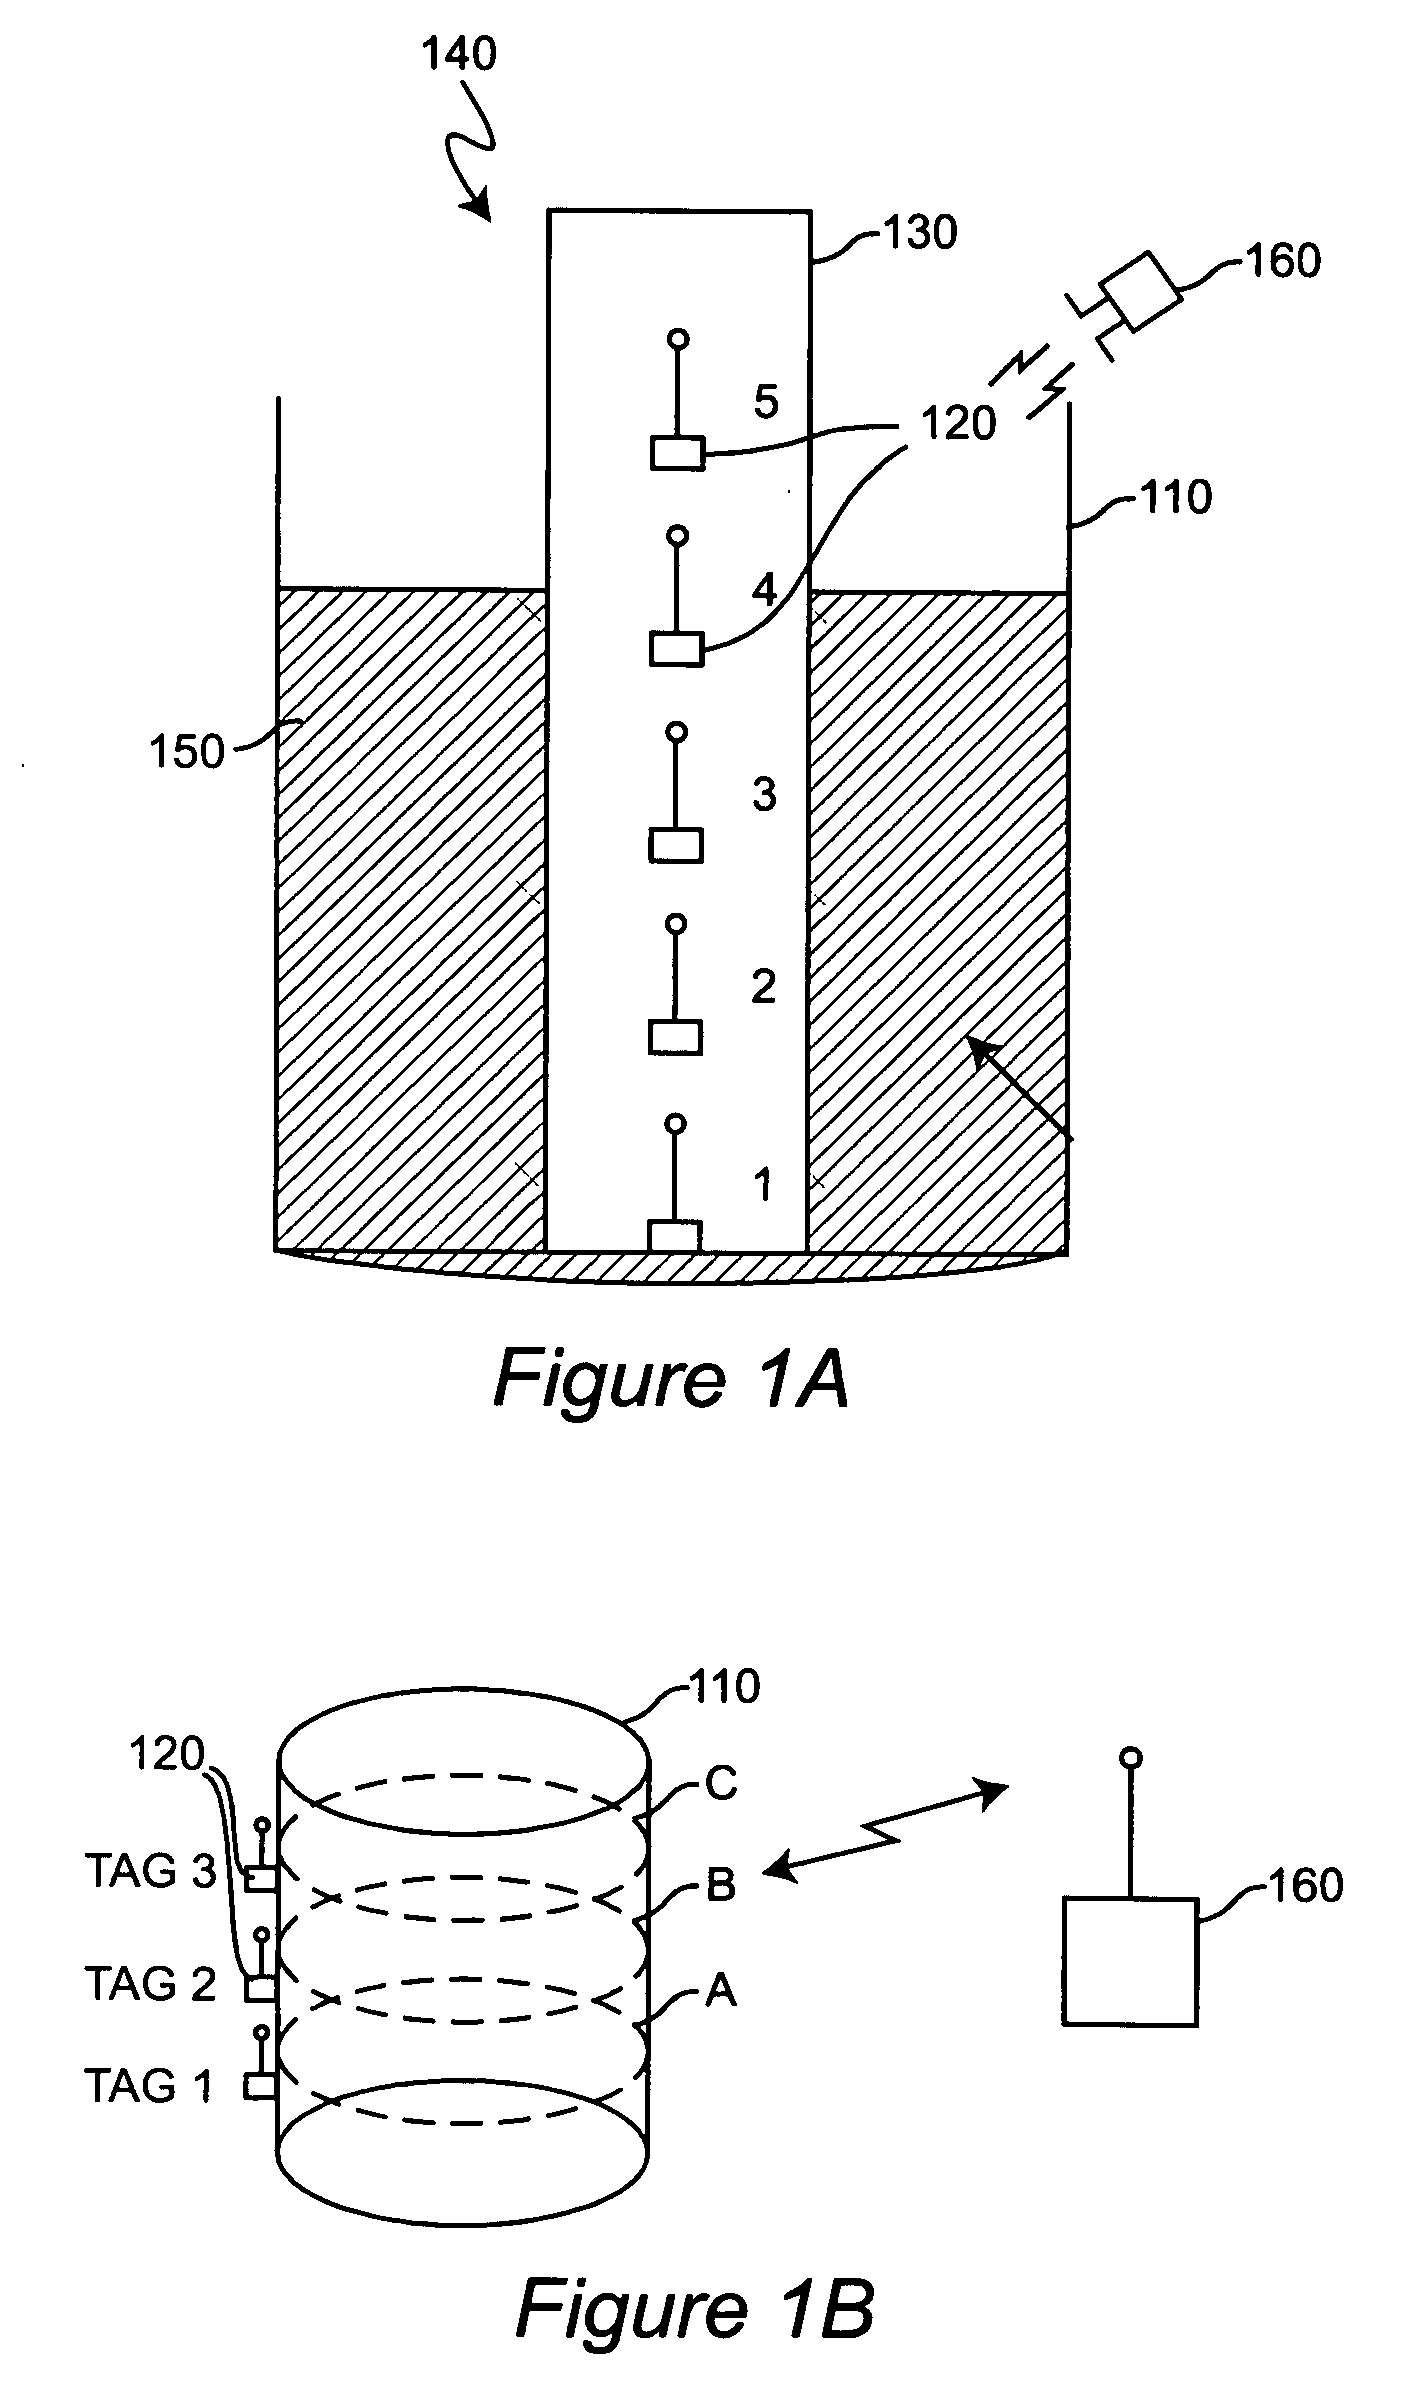 Method for measuring material level in a container using RFID tags